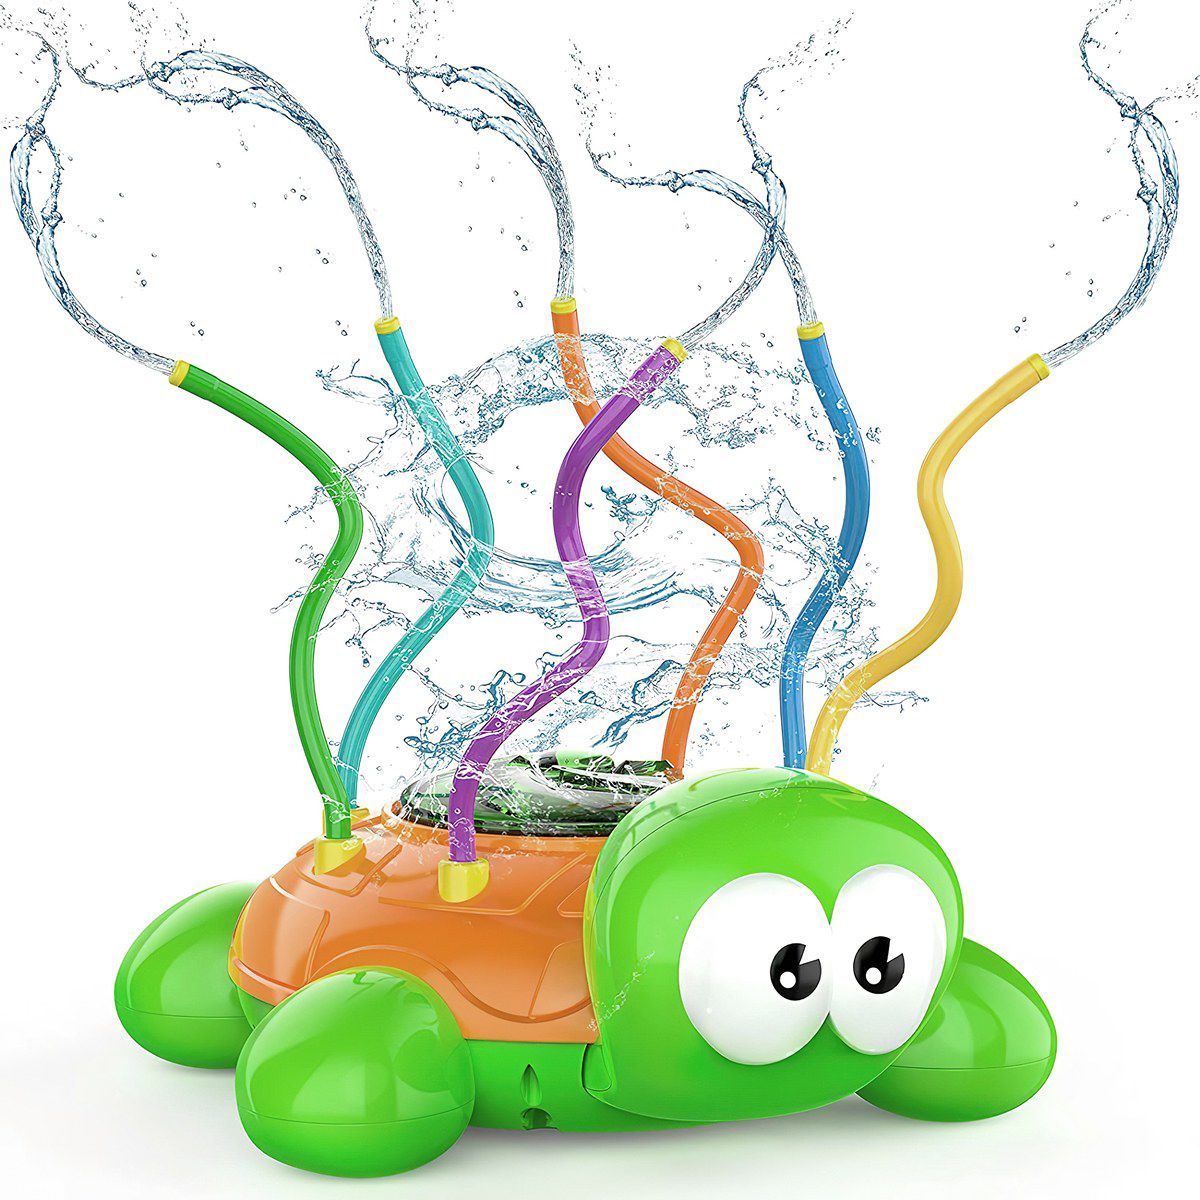 Nothing But Fun Toys Spinning Turtle Sprinkler - Sprays in 6 Different Directions | Target